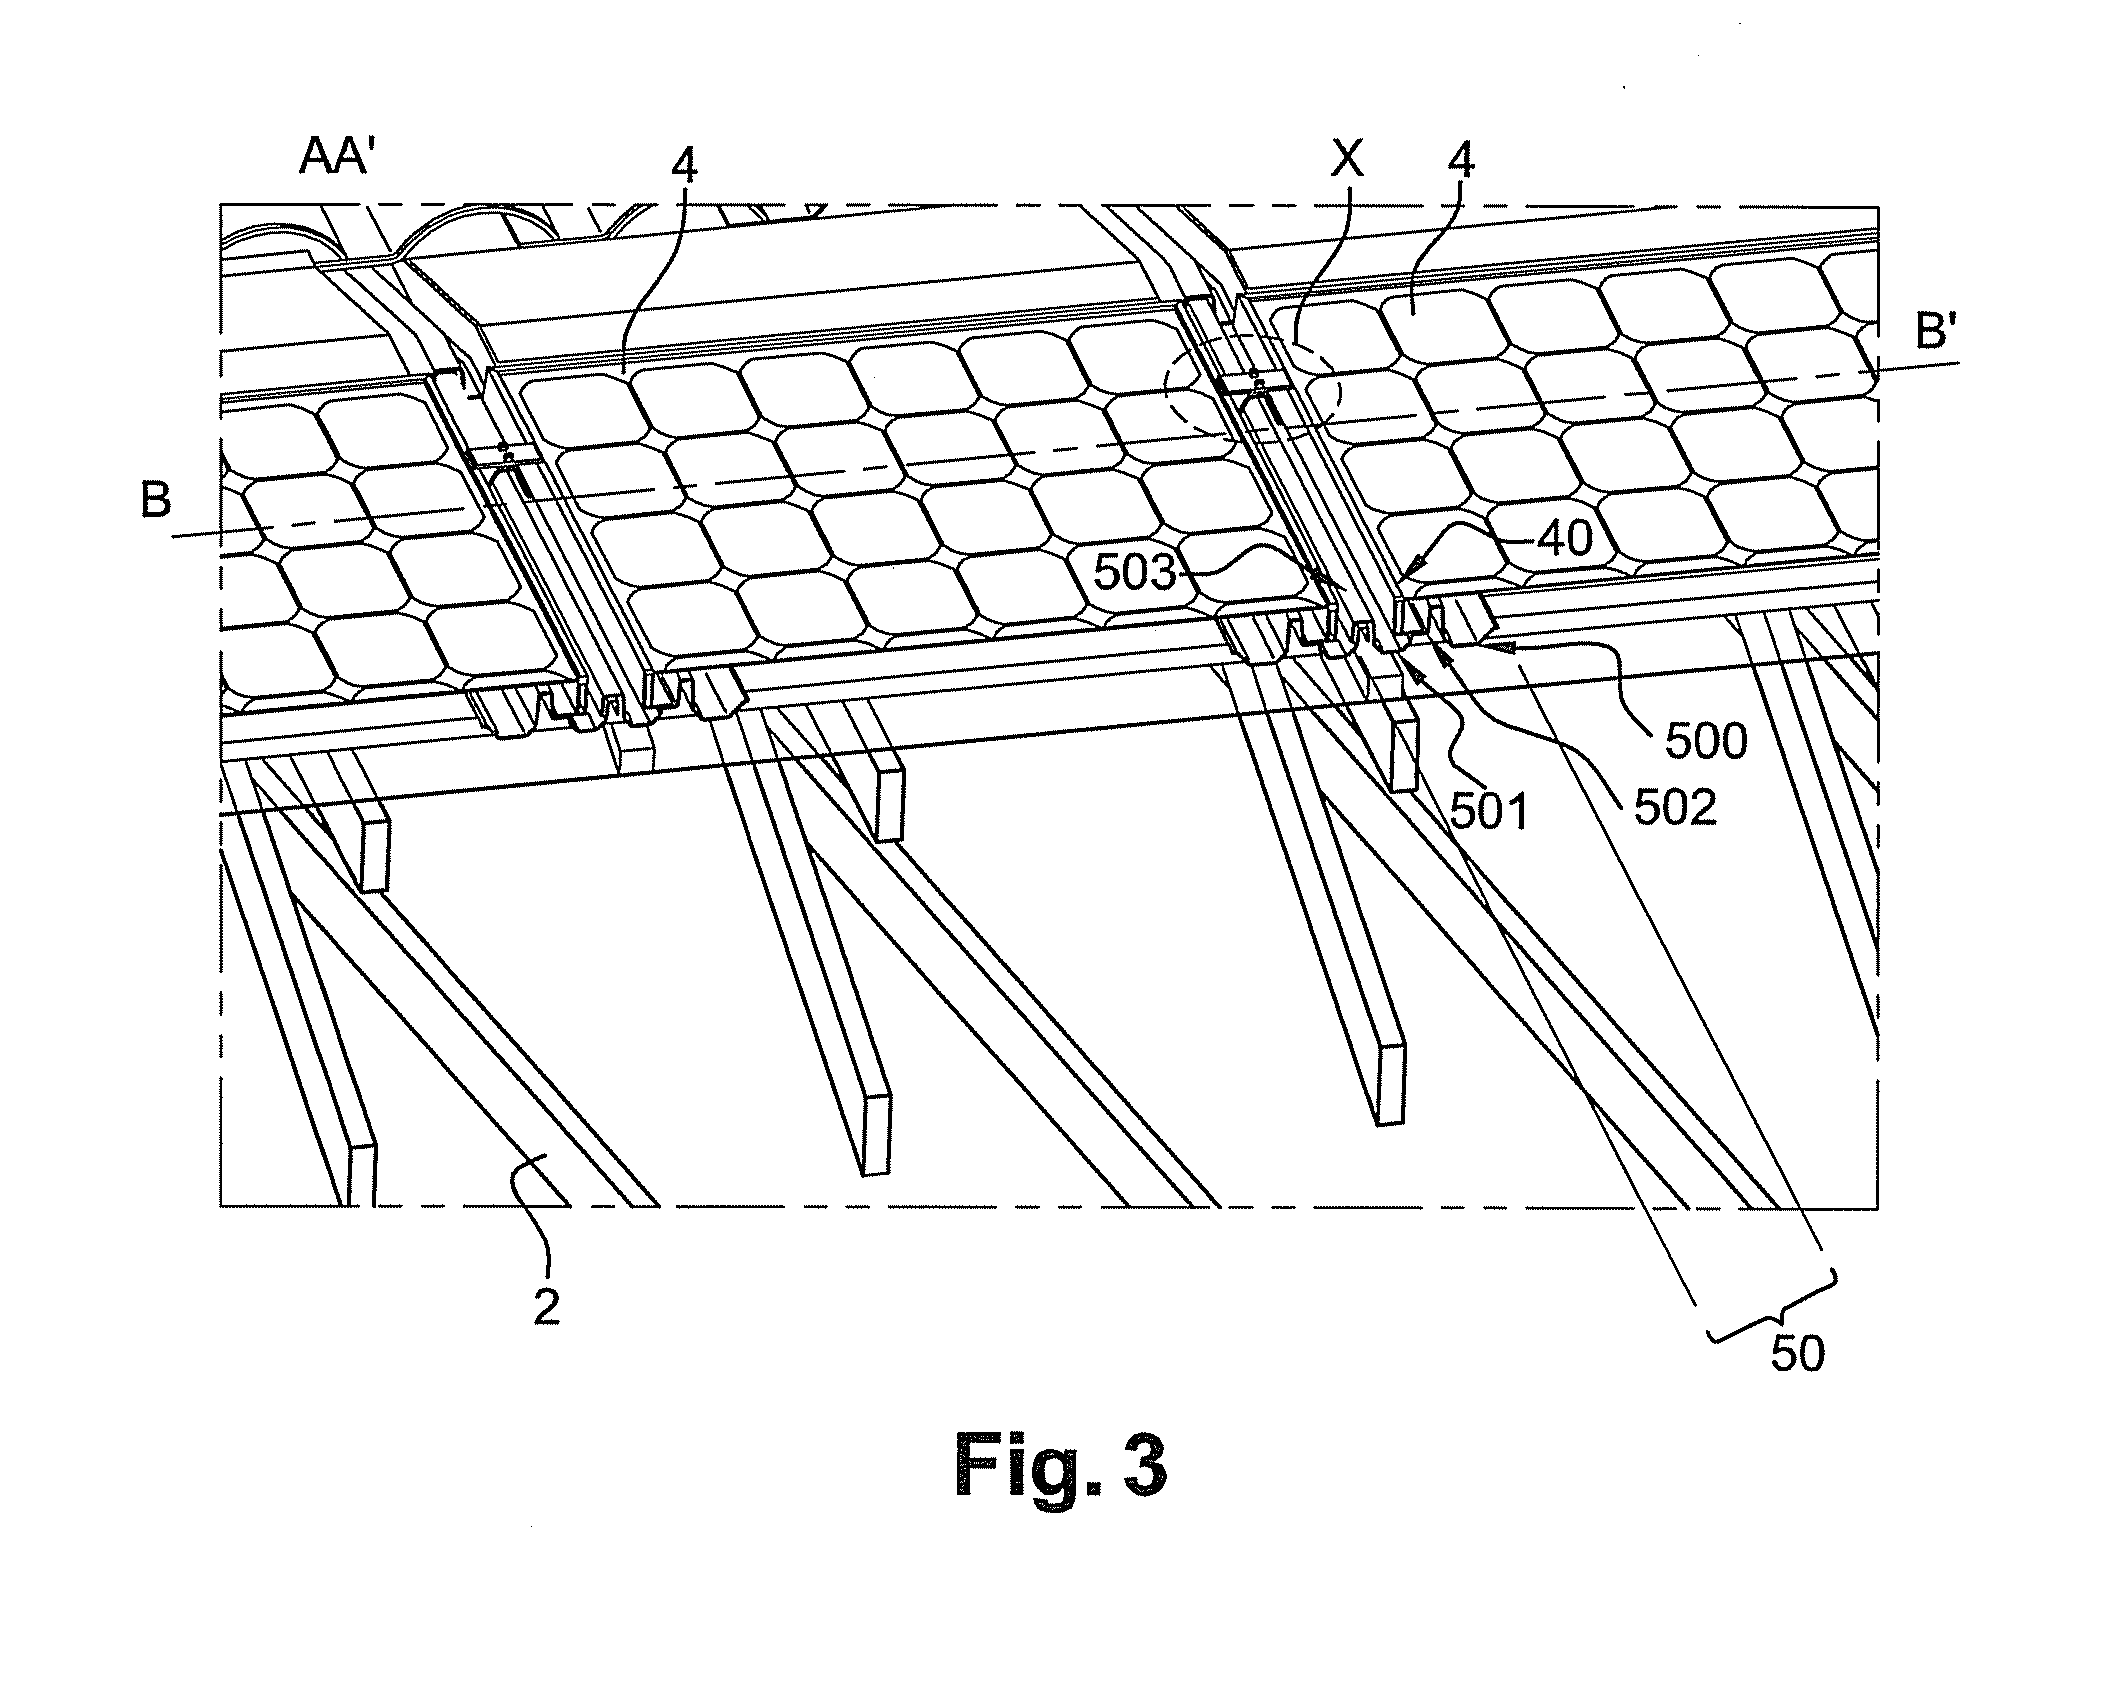 Structure for rigidly connecting solar panels to a fixture